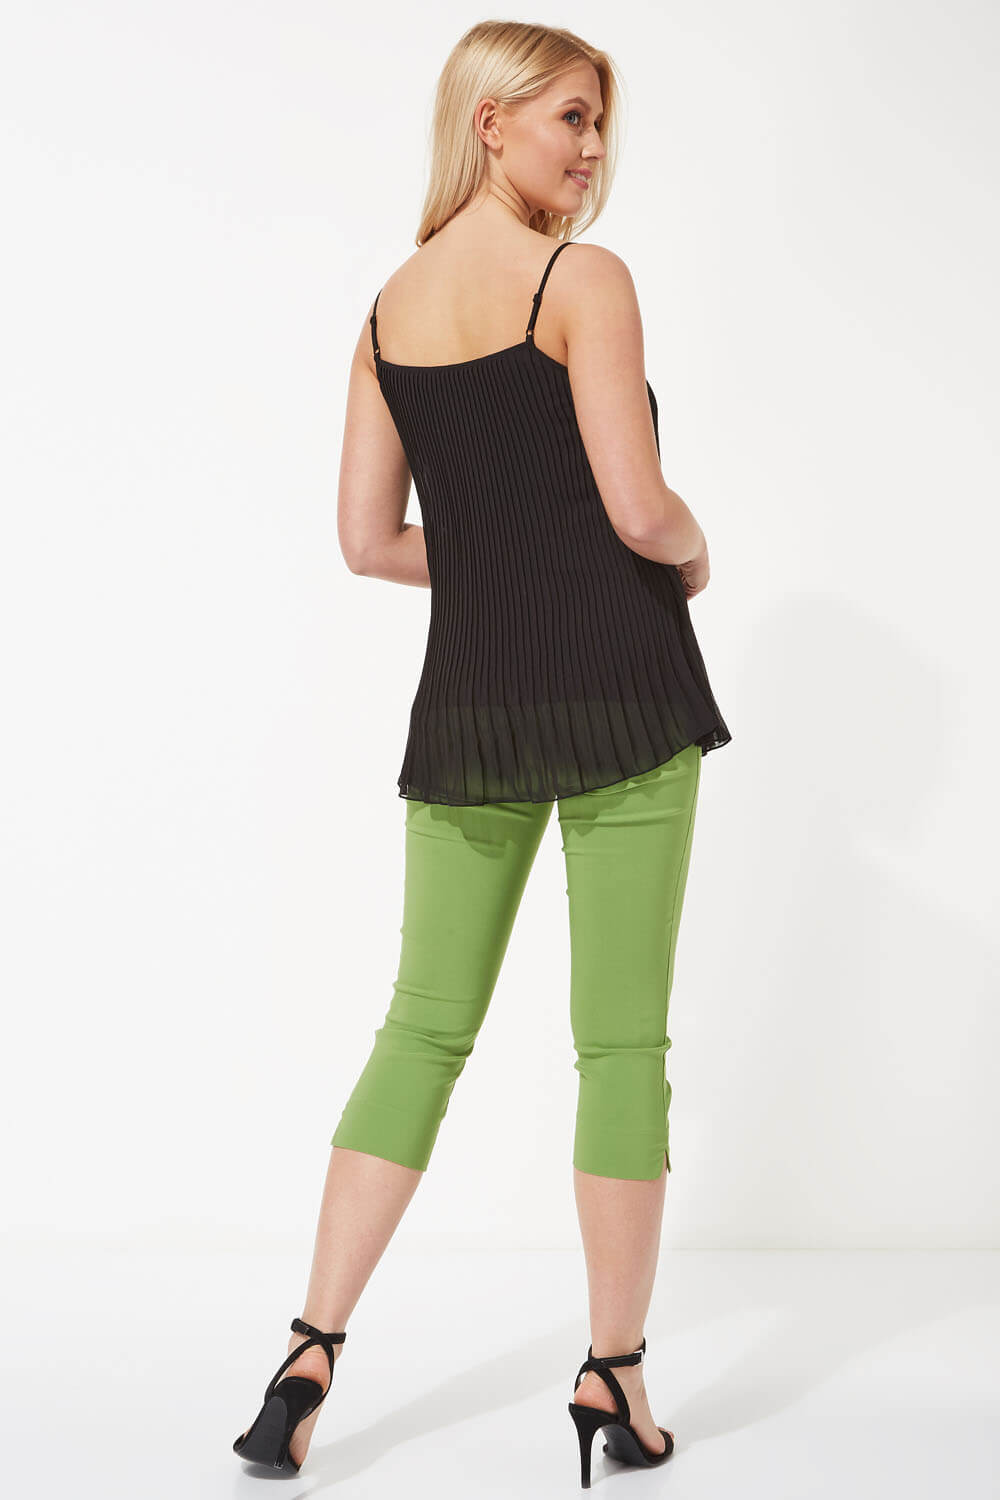 Black Pleated Lace Trim Cami Top, Image 3 of 6